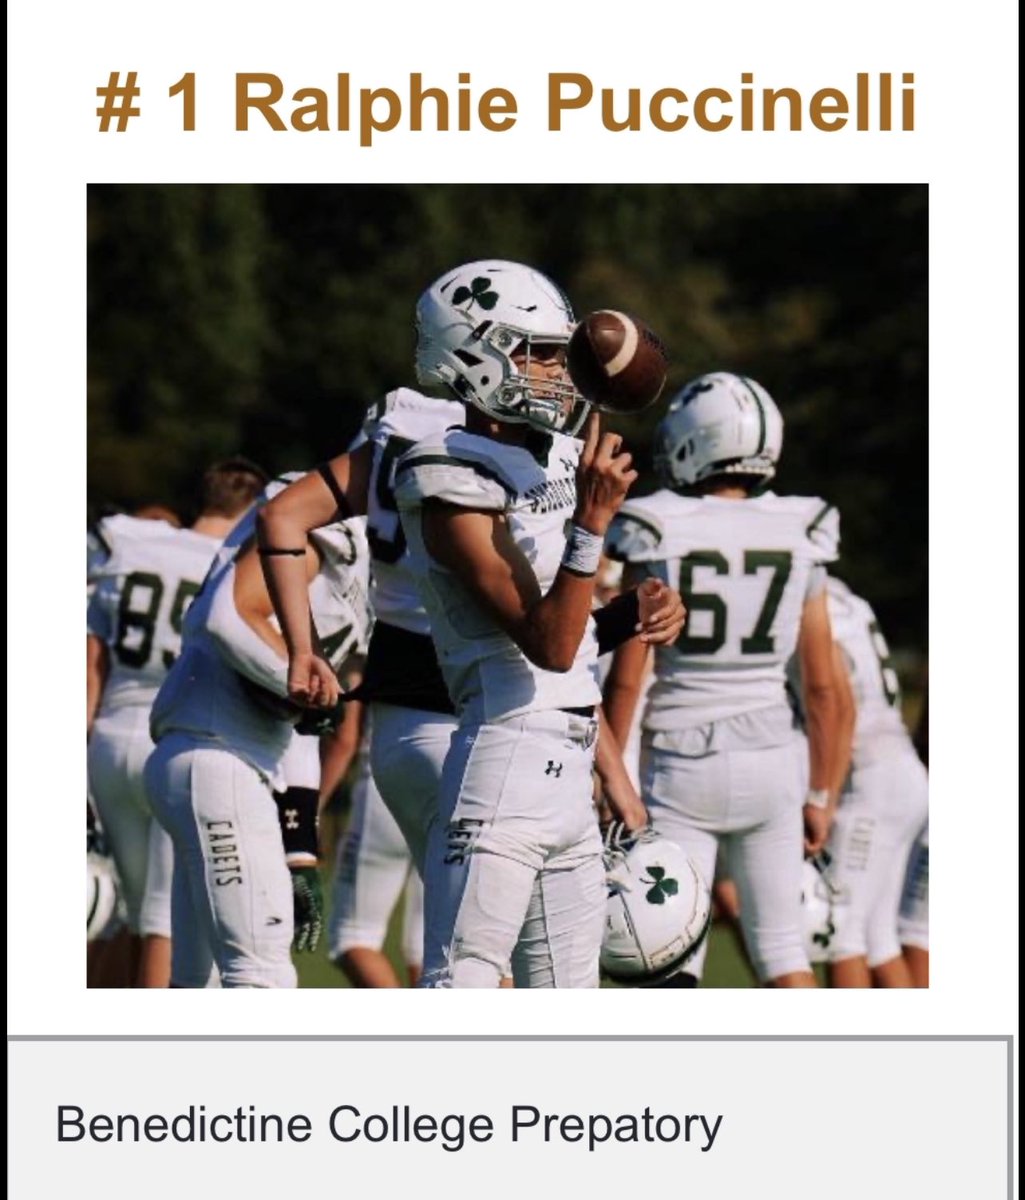 Appreciate the #1 ranking in Class of 27’ in Virginia! More to come! @QBHitList @Rivals @On3sports @Elite11 @UANextFootball hudl.com/profile/196603… @bcprva @cadetsports1 ☘️